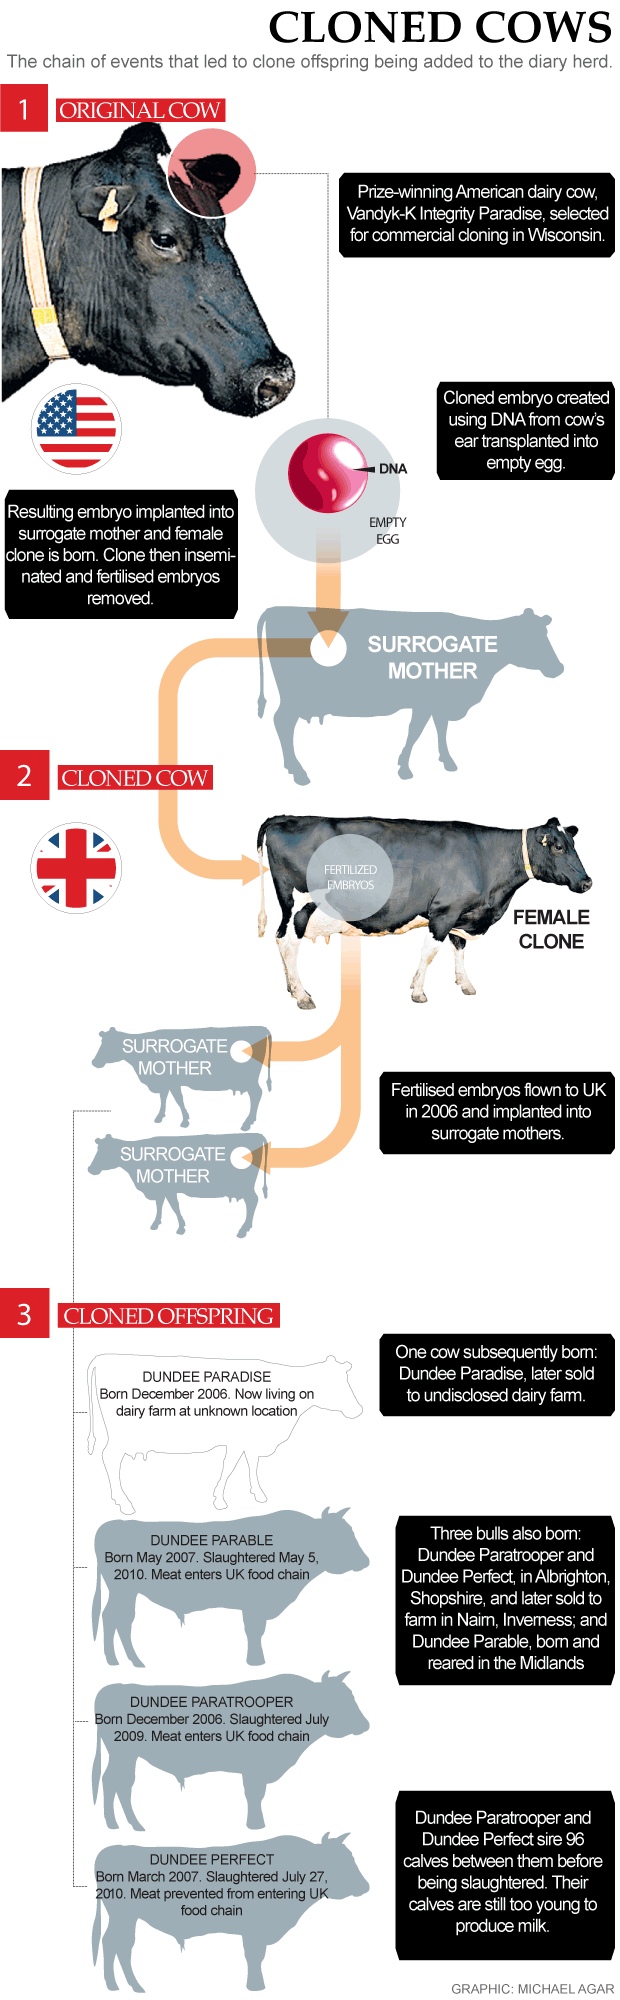 Cloned Cows Infographic